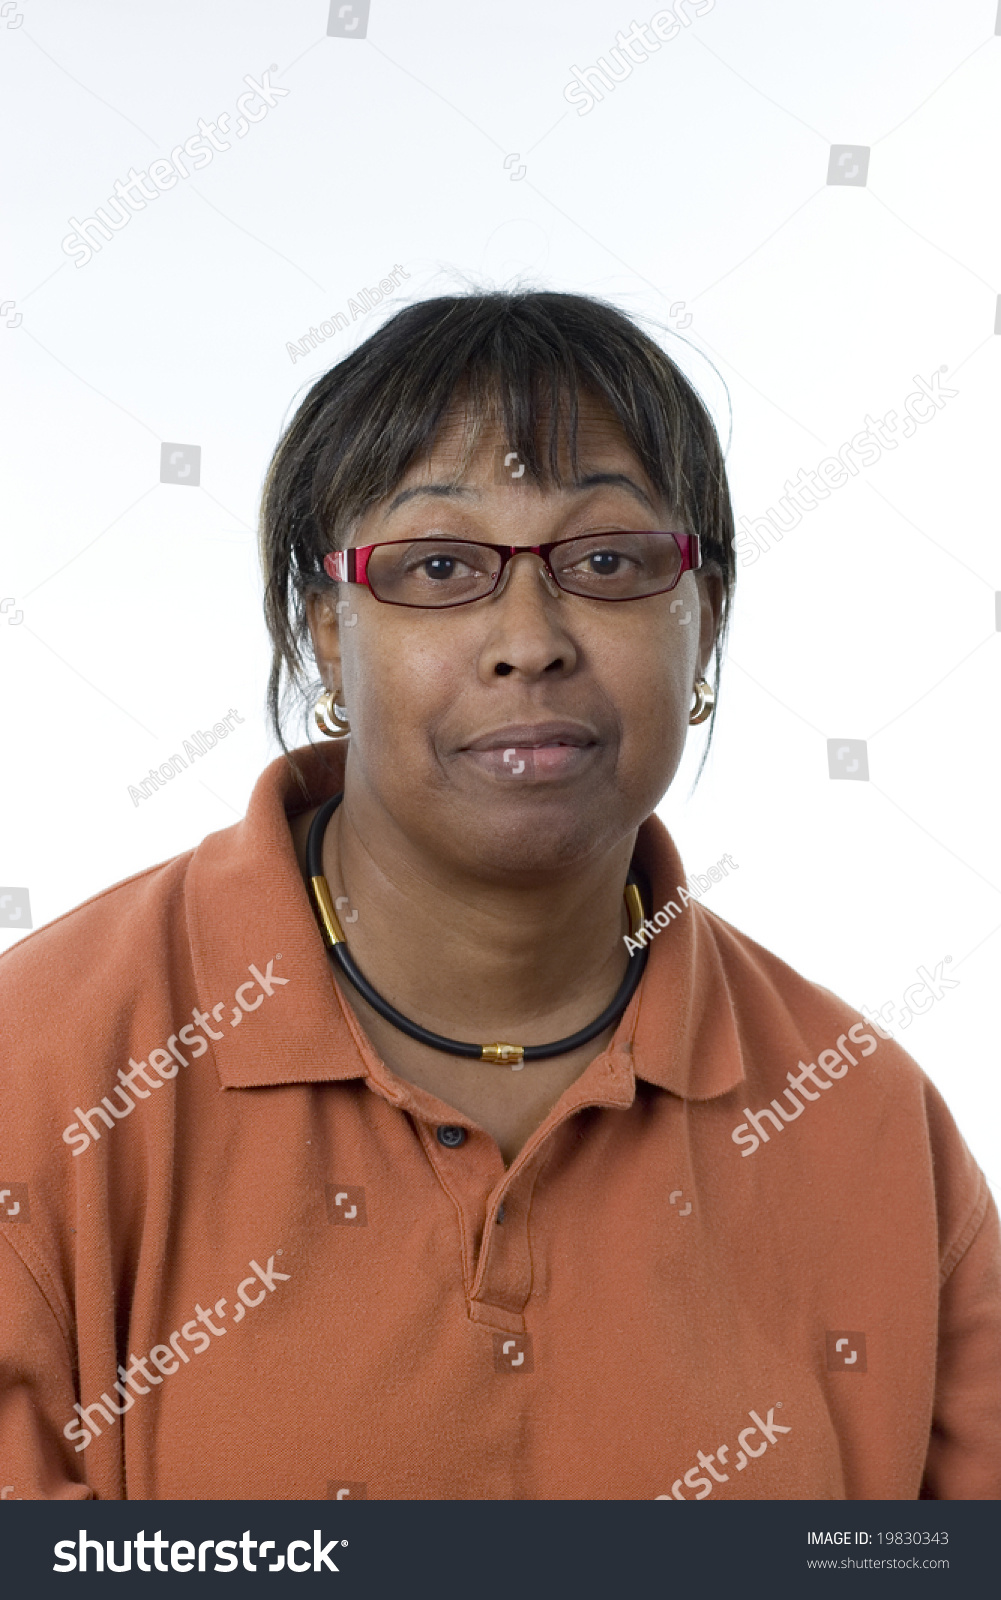 Informal Portrait Of A Black Middle-Aged Woman Slightly Smiling Wearing ...